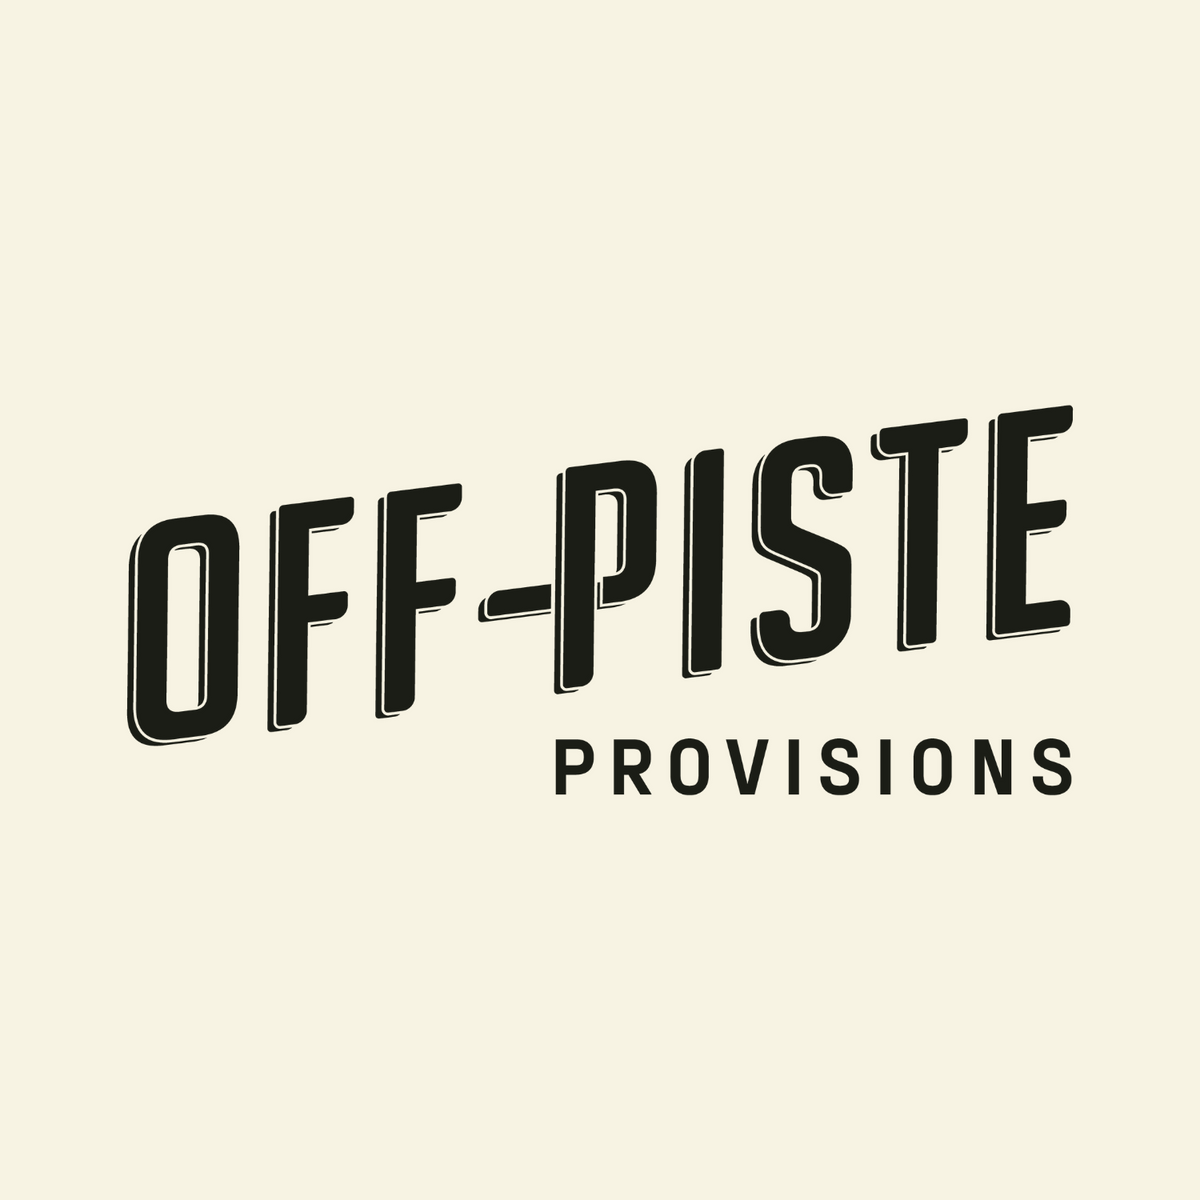 Off-Piste Provisions  Plant-based protein on the go